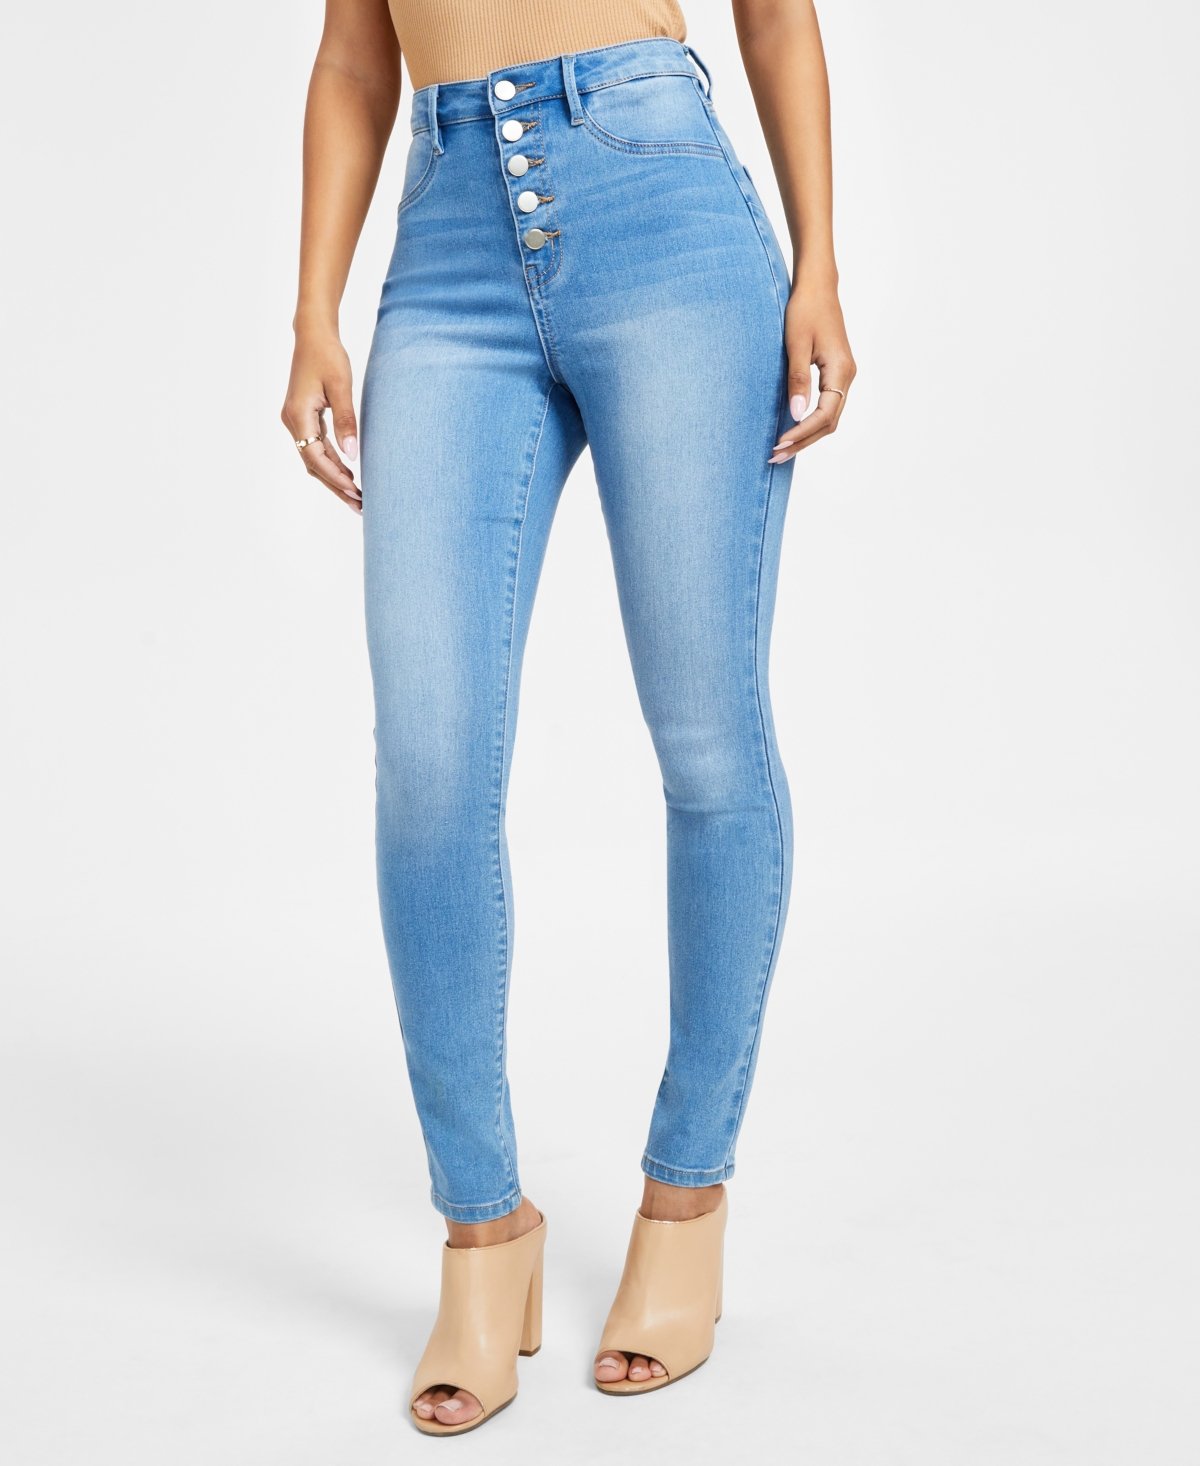 Juniors' 5-Button High Waisted Curvy Skinny Jeans - Andes Wash